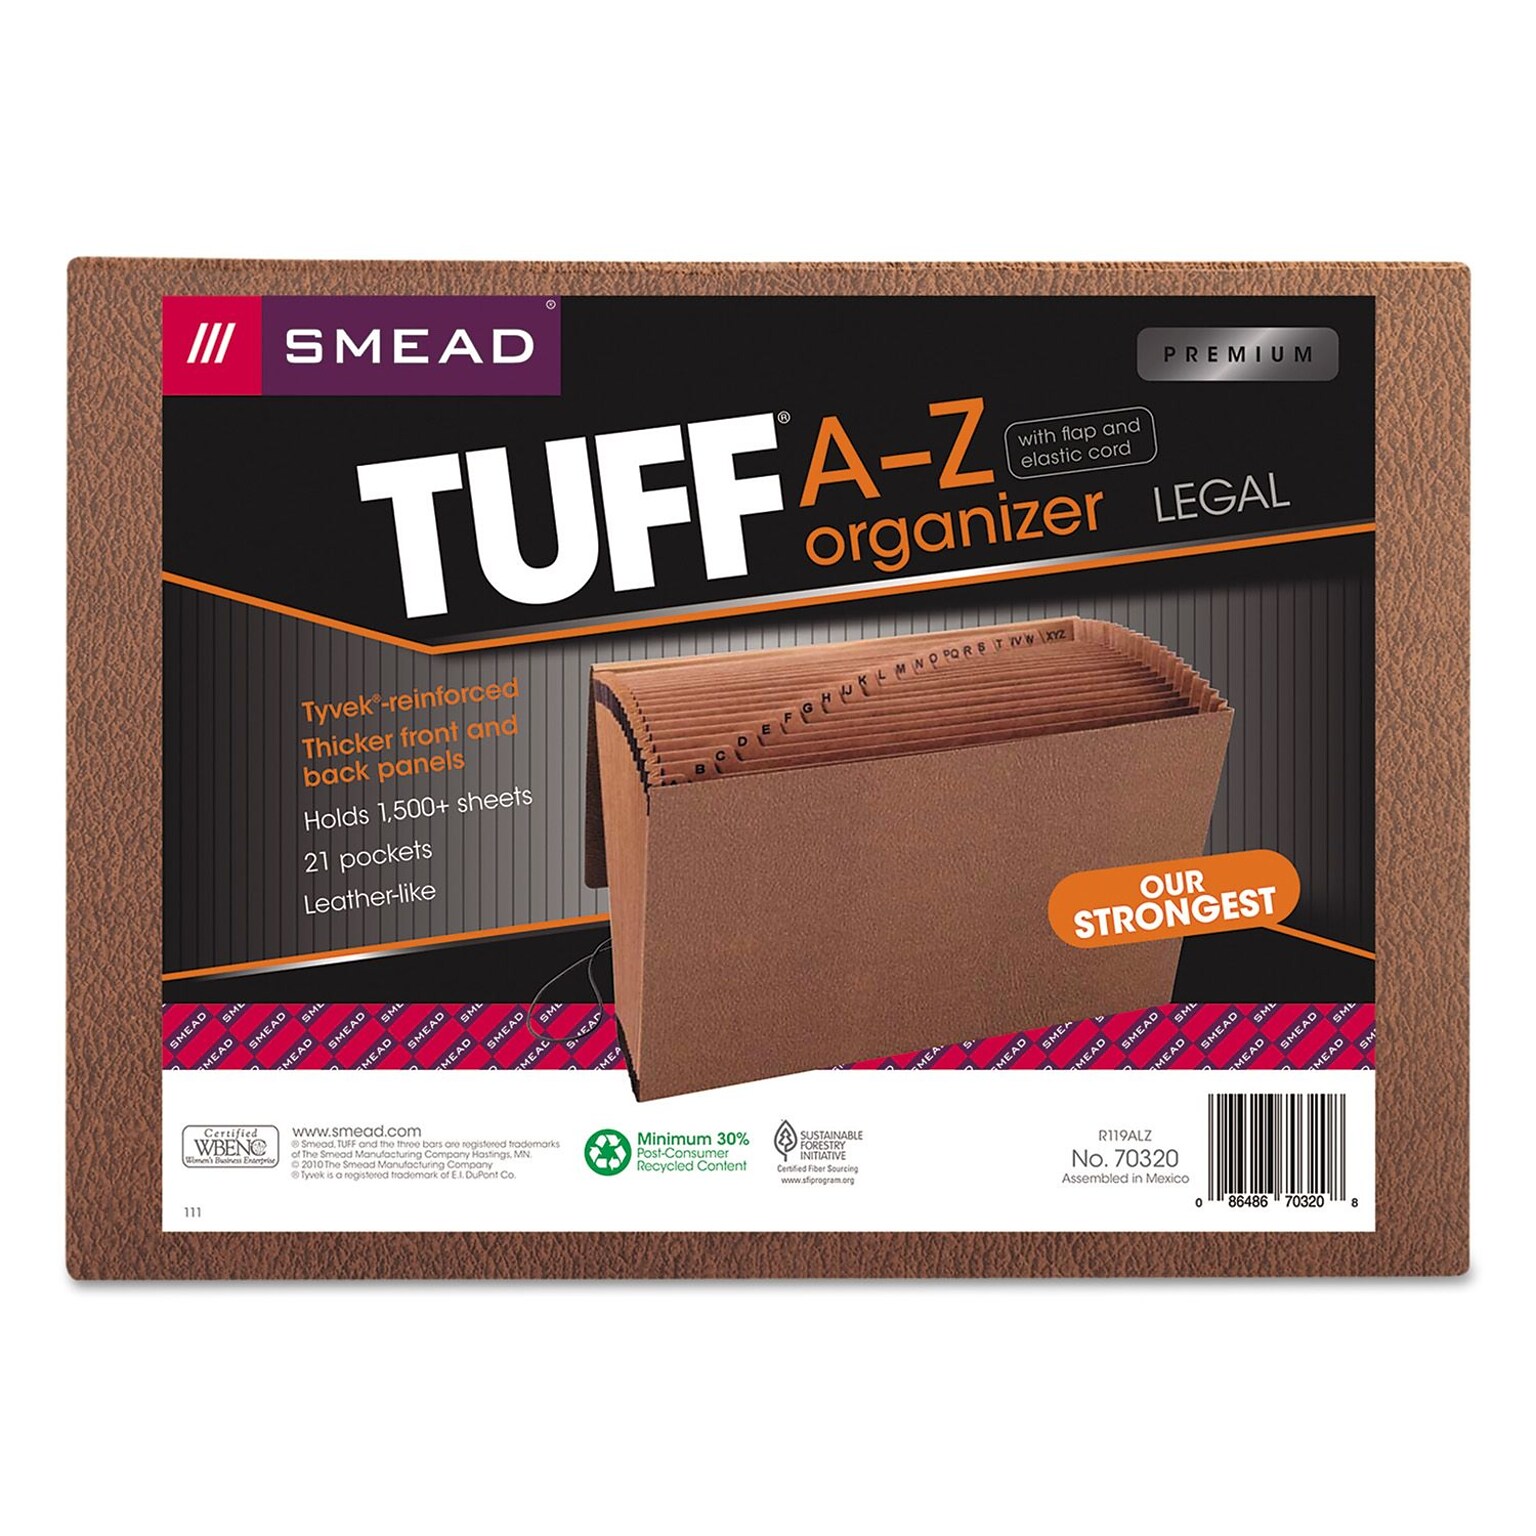 Smead TUFF Expanding File, Alphabetic (A-Z), 21 Pockets, Flap and Elastic Cord Closure, Legal Size, Redrope Stock (70320)